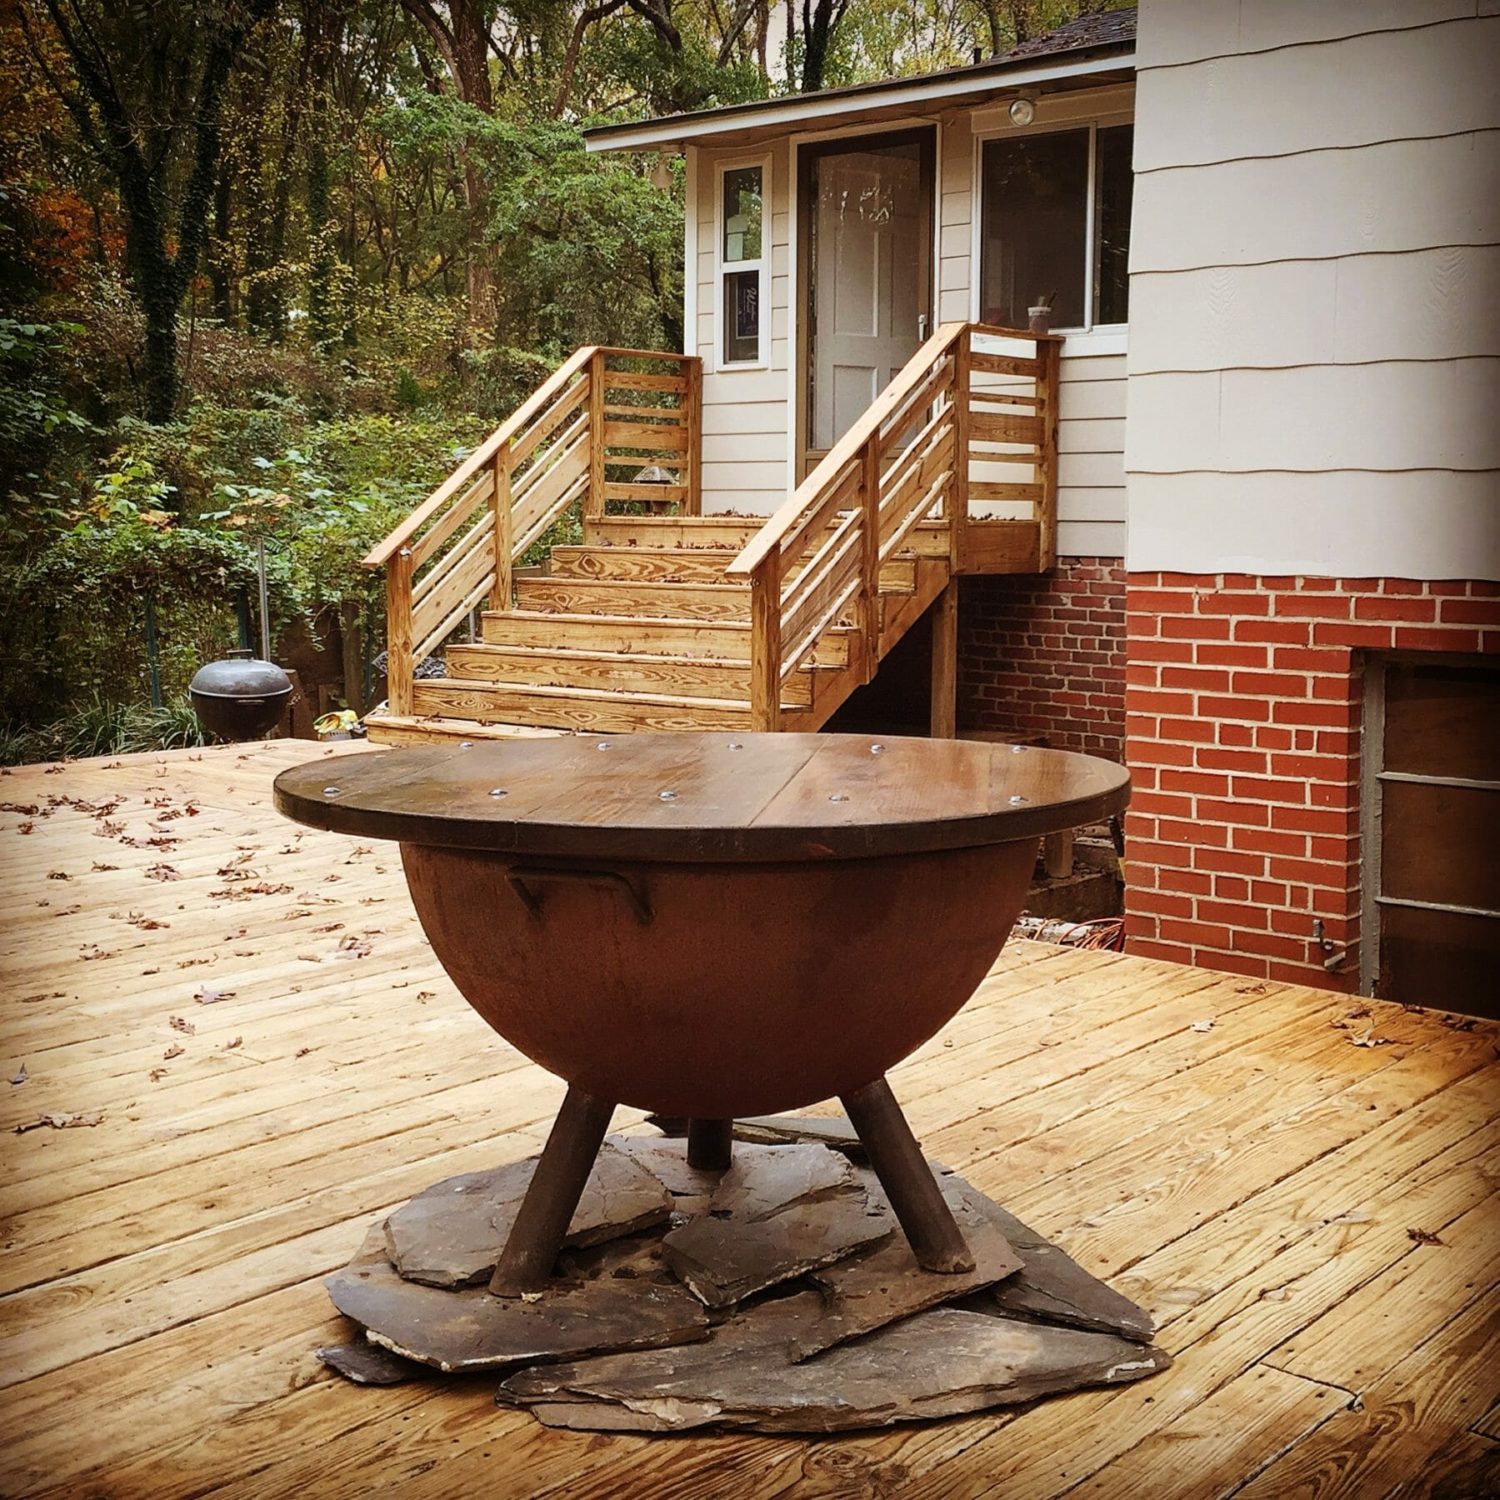 Fire Pits on Wooden Decks: Fire Pit Safety Tips to Follow